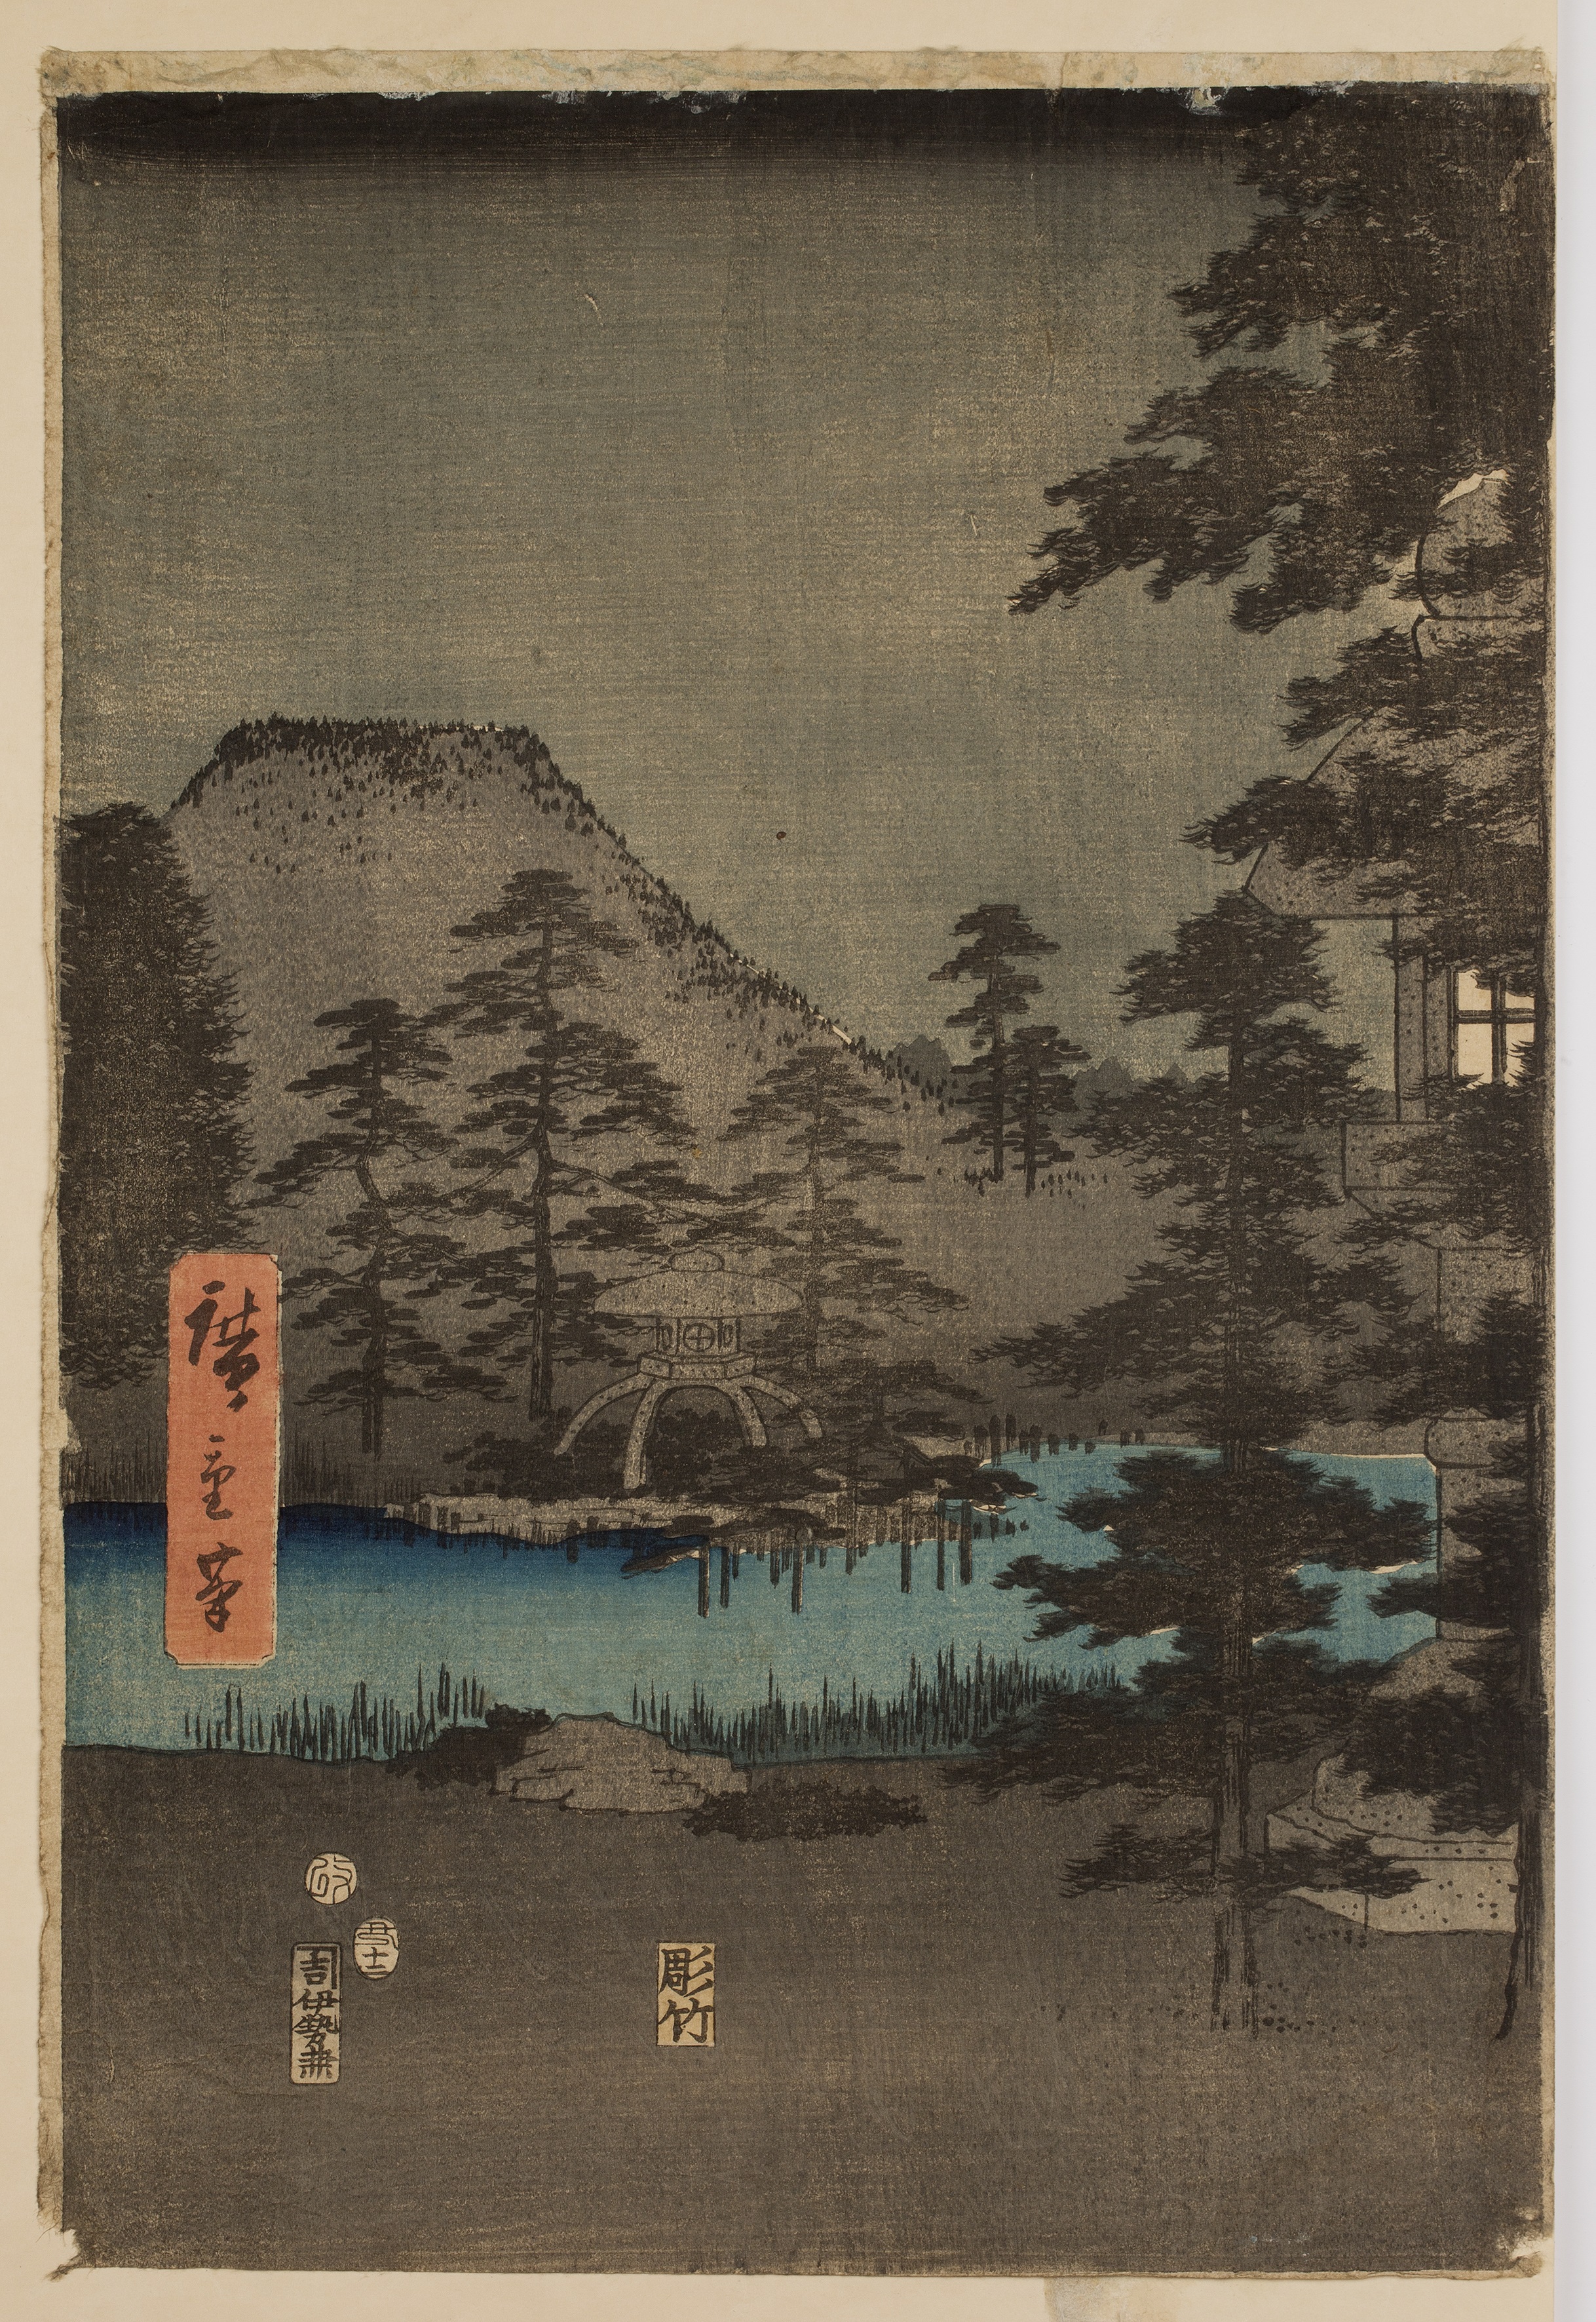 Collection of woodblock prints after Utagawa Hiroshige (Japanese, 1797-1858) to include a section of - Image 4 of 4